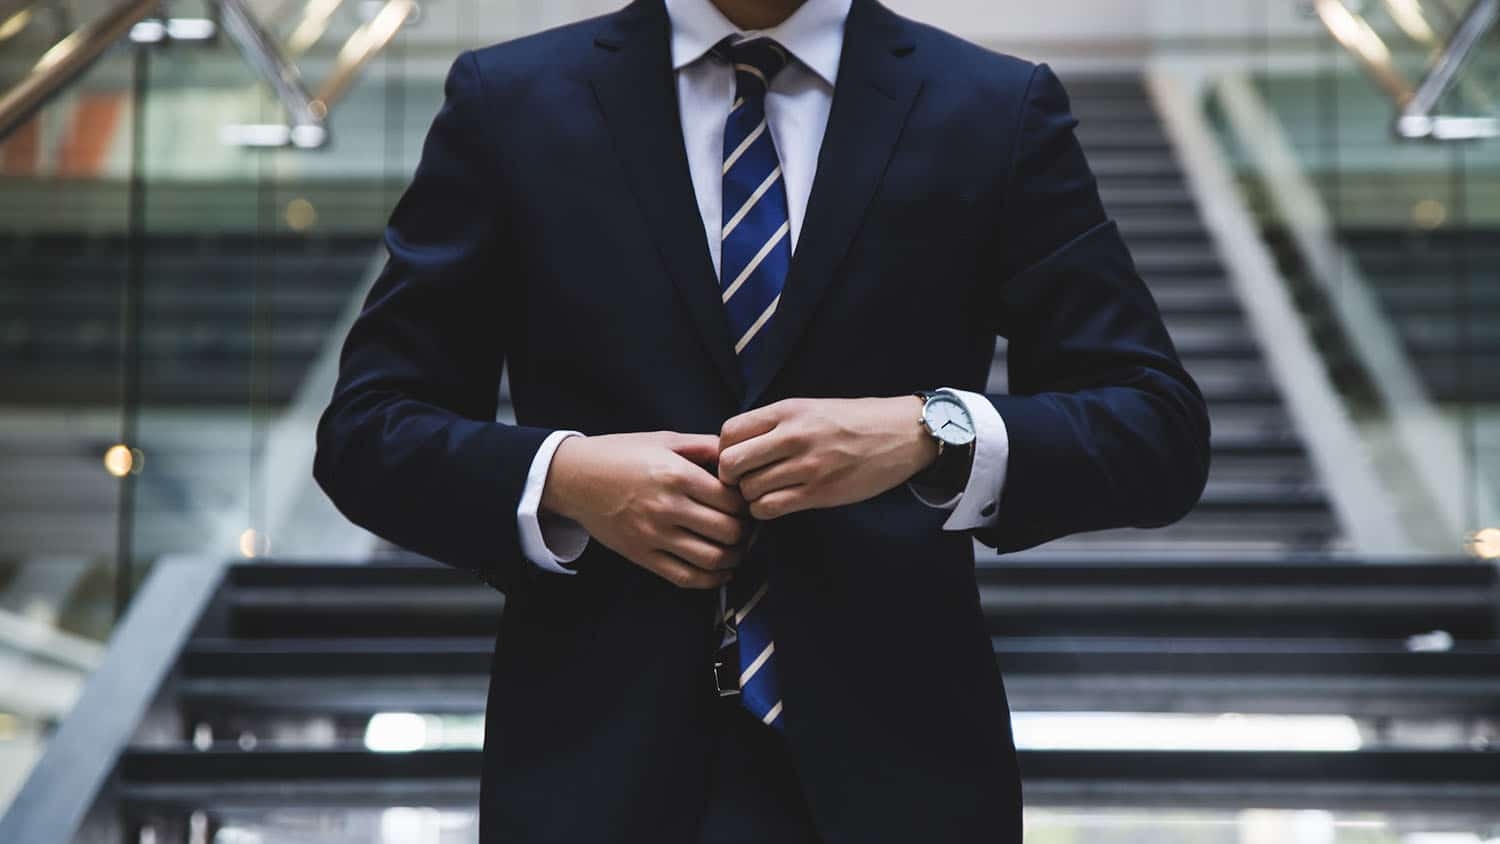 photo shows a man from the neck to the waist. He is wearing a suit and tie and is buttoning his coat. the photo suggests a business person preparing to go into a meeting or interview.